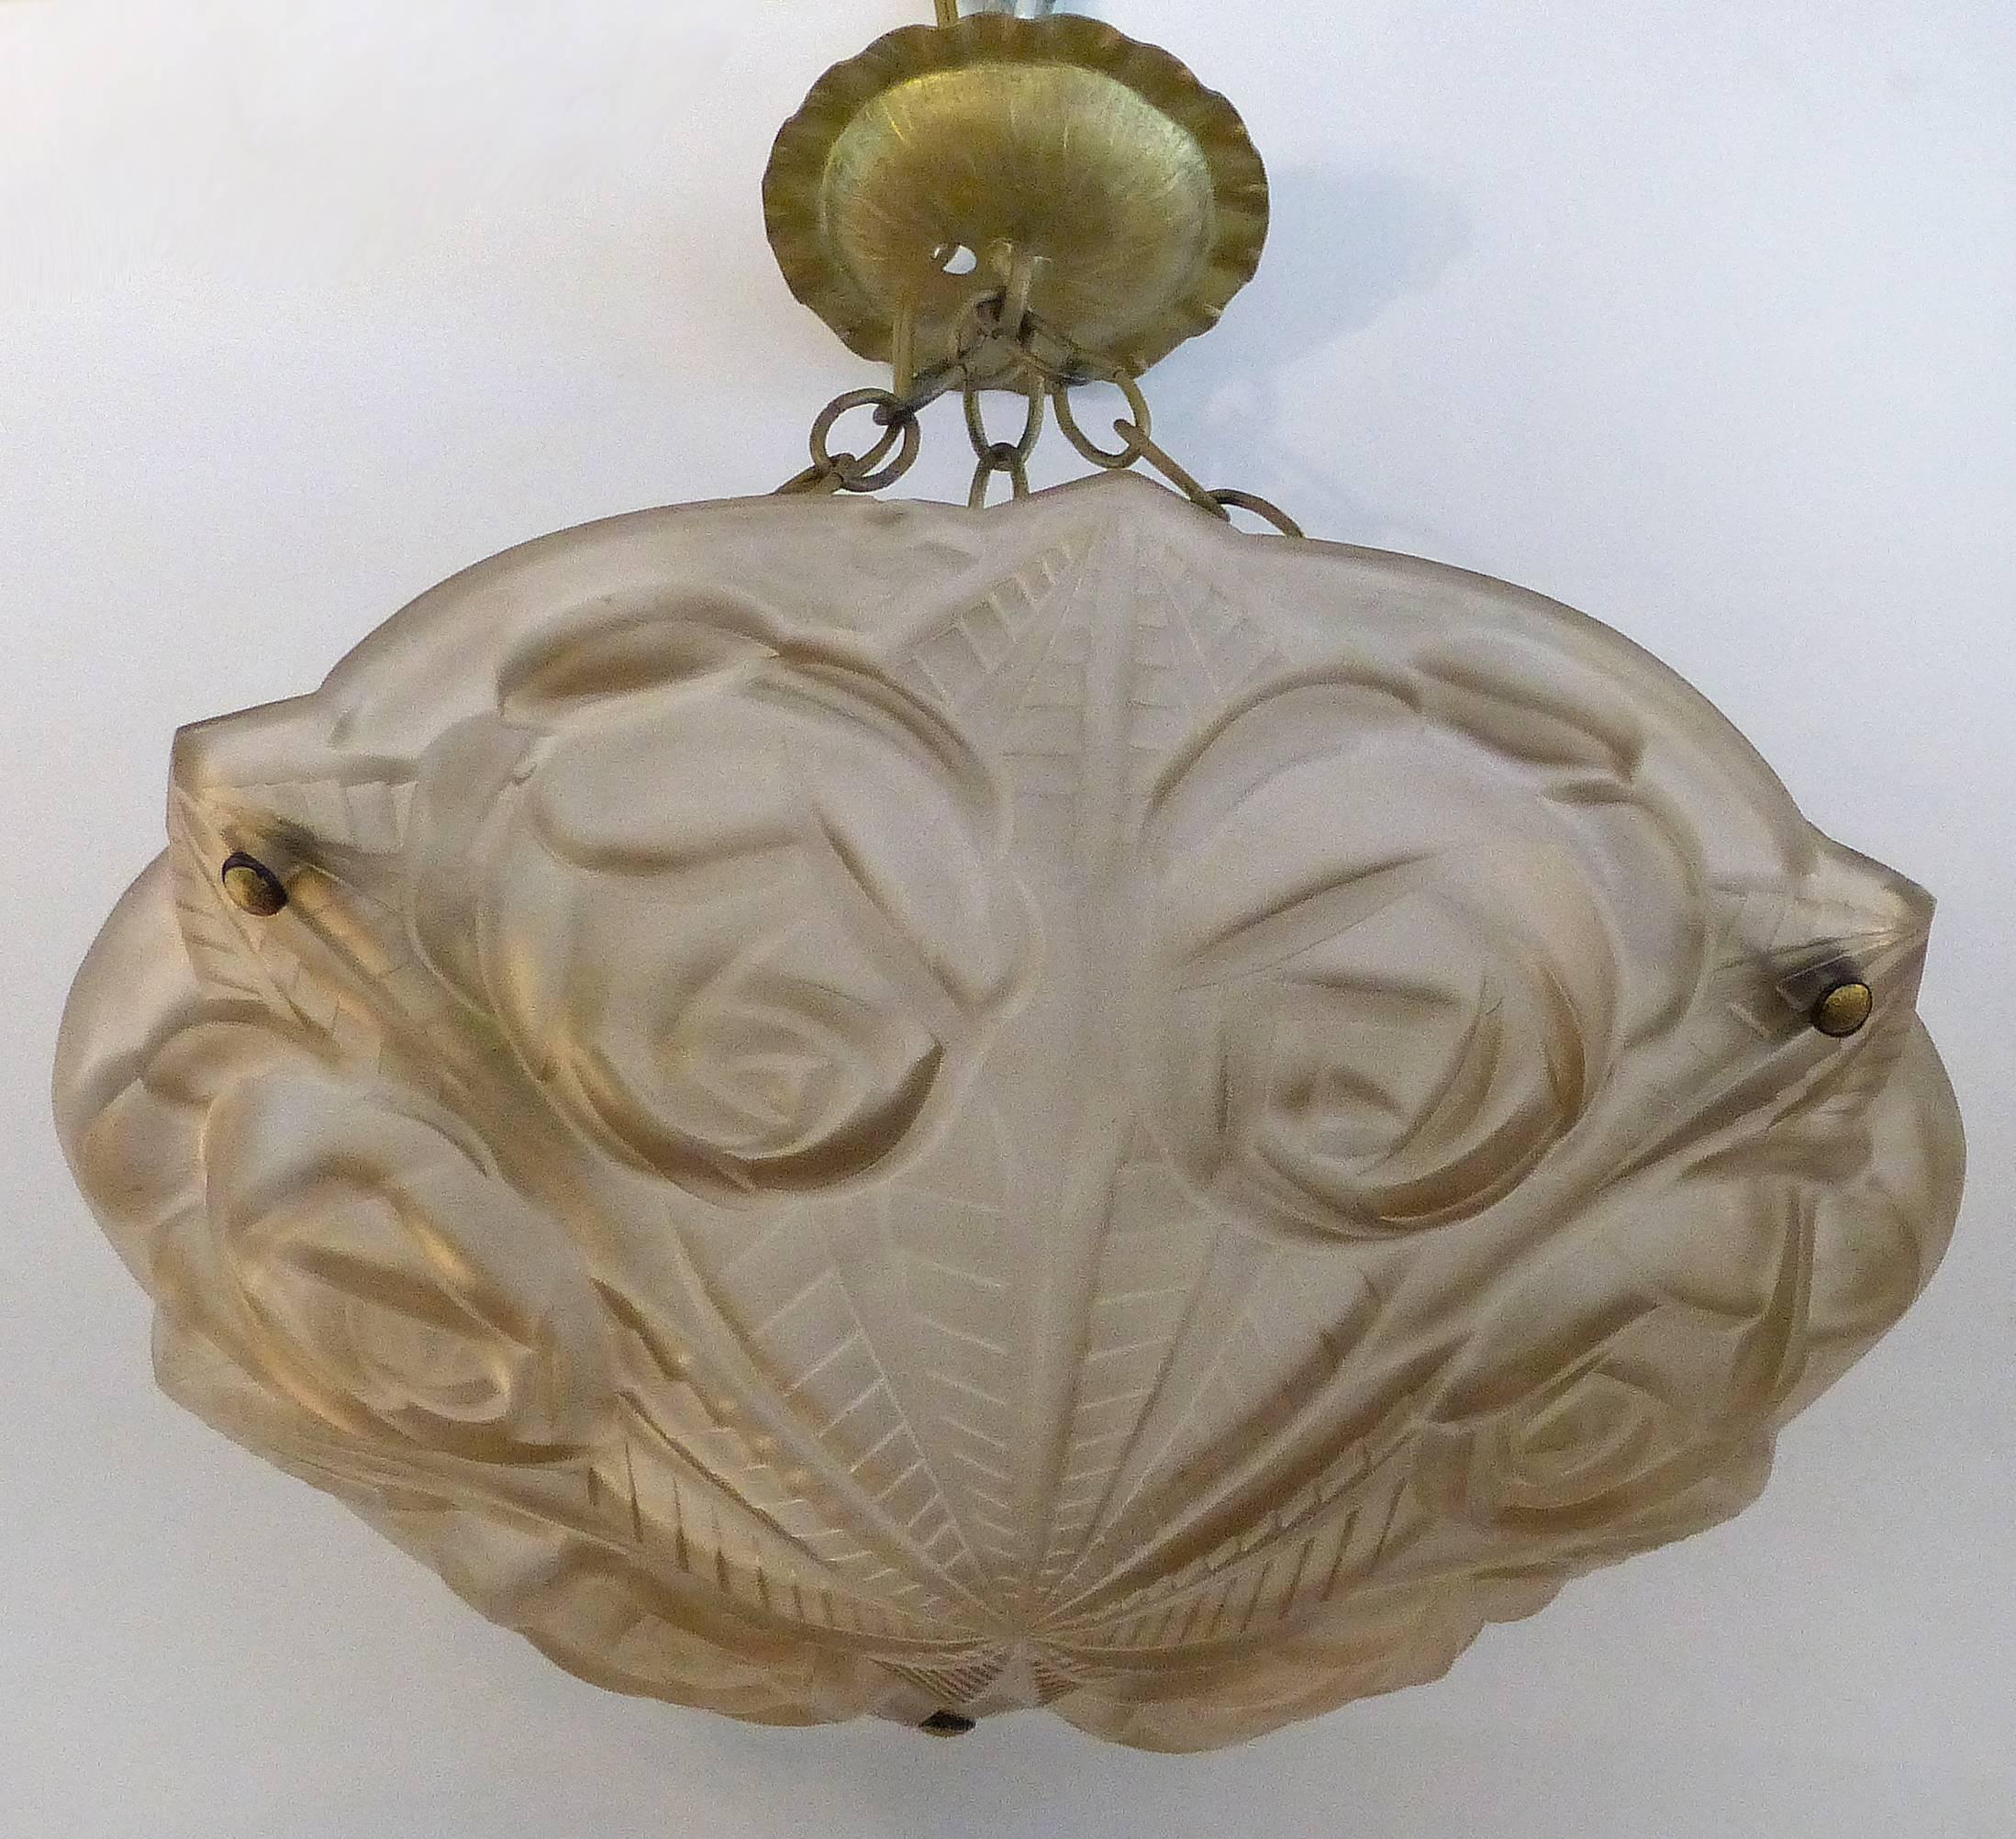 Degue French Art Deco Cast Mauve Glass Pendant Chandelier, Signed, circa 1930

Offered for sale is a French Art Deco pendant light fixture signed Degue, circa 1930. The cast glass has a floral pattern with roses and is etched with the Degue